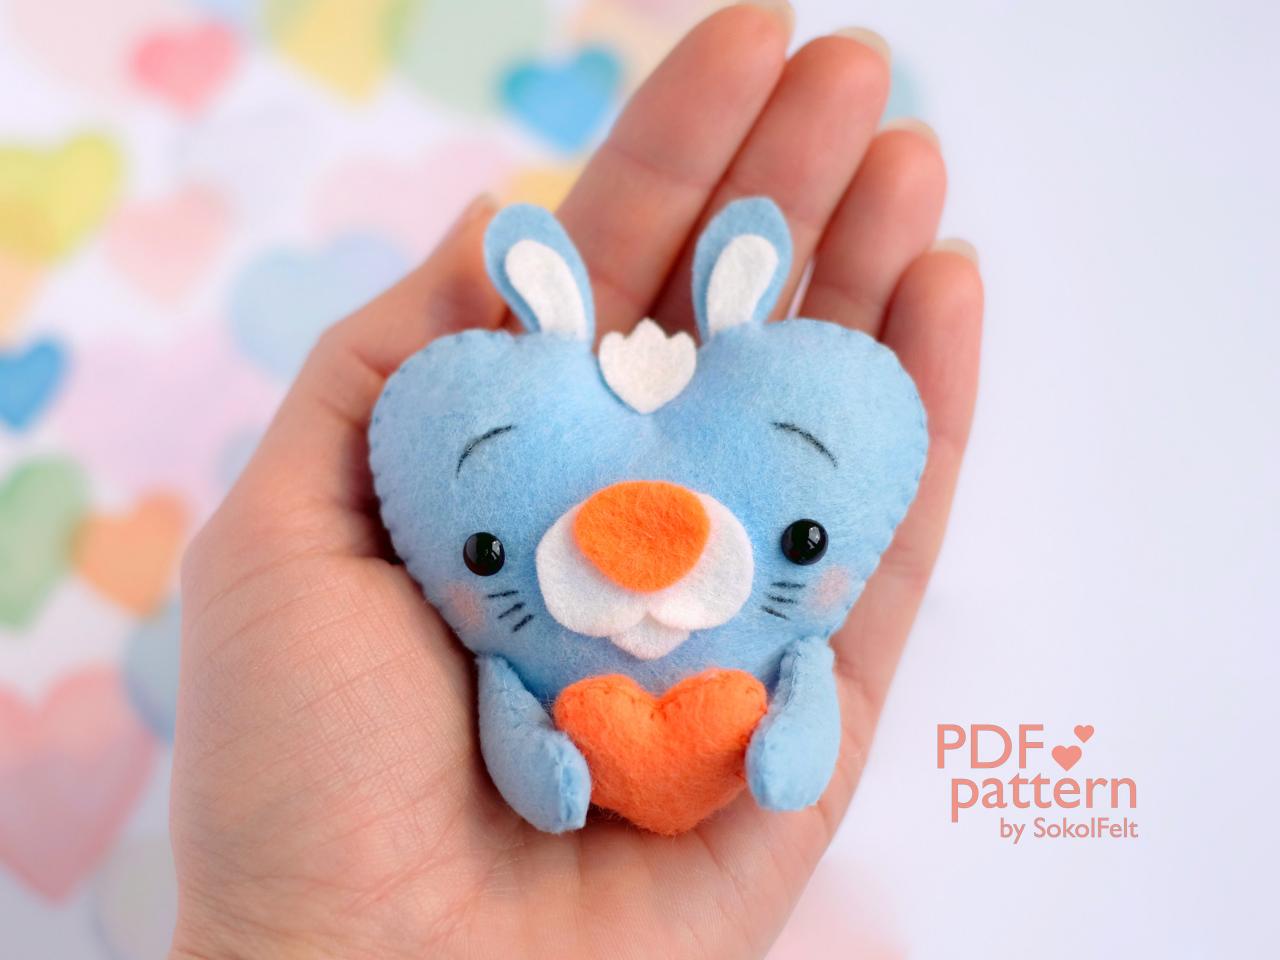 Felt Baby Rabbit Toy Sewing Pdf Pattern, Heart Shaped Animal Ornament, St. Valentines Pattern, Hare Sewing Digital Tutorial